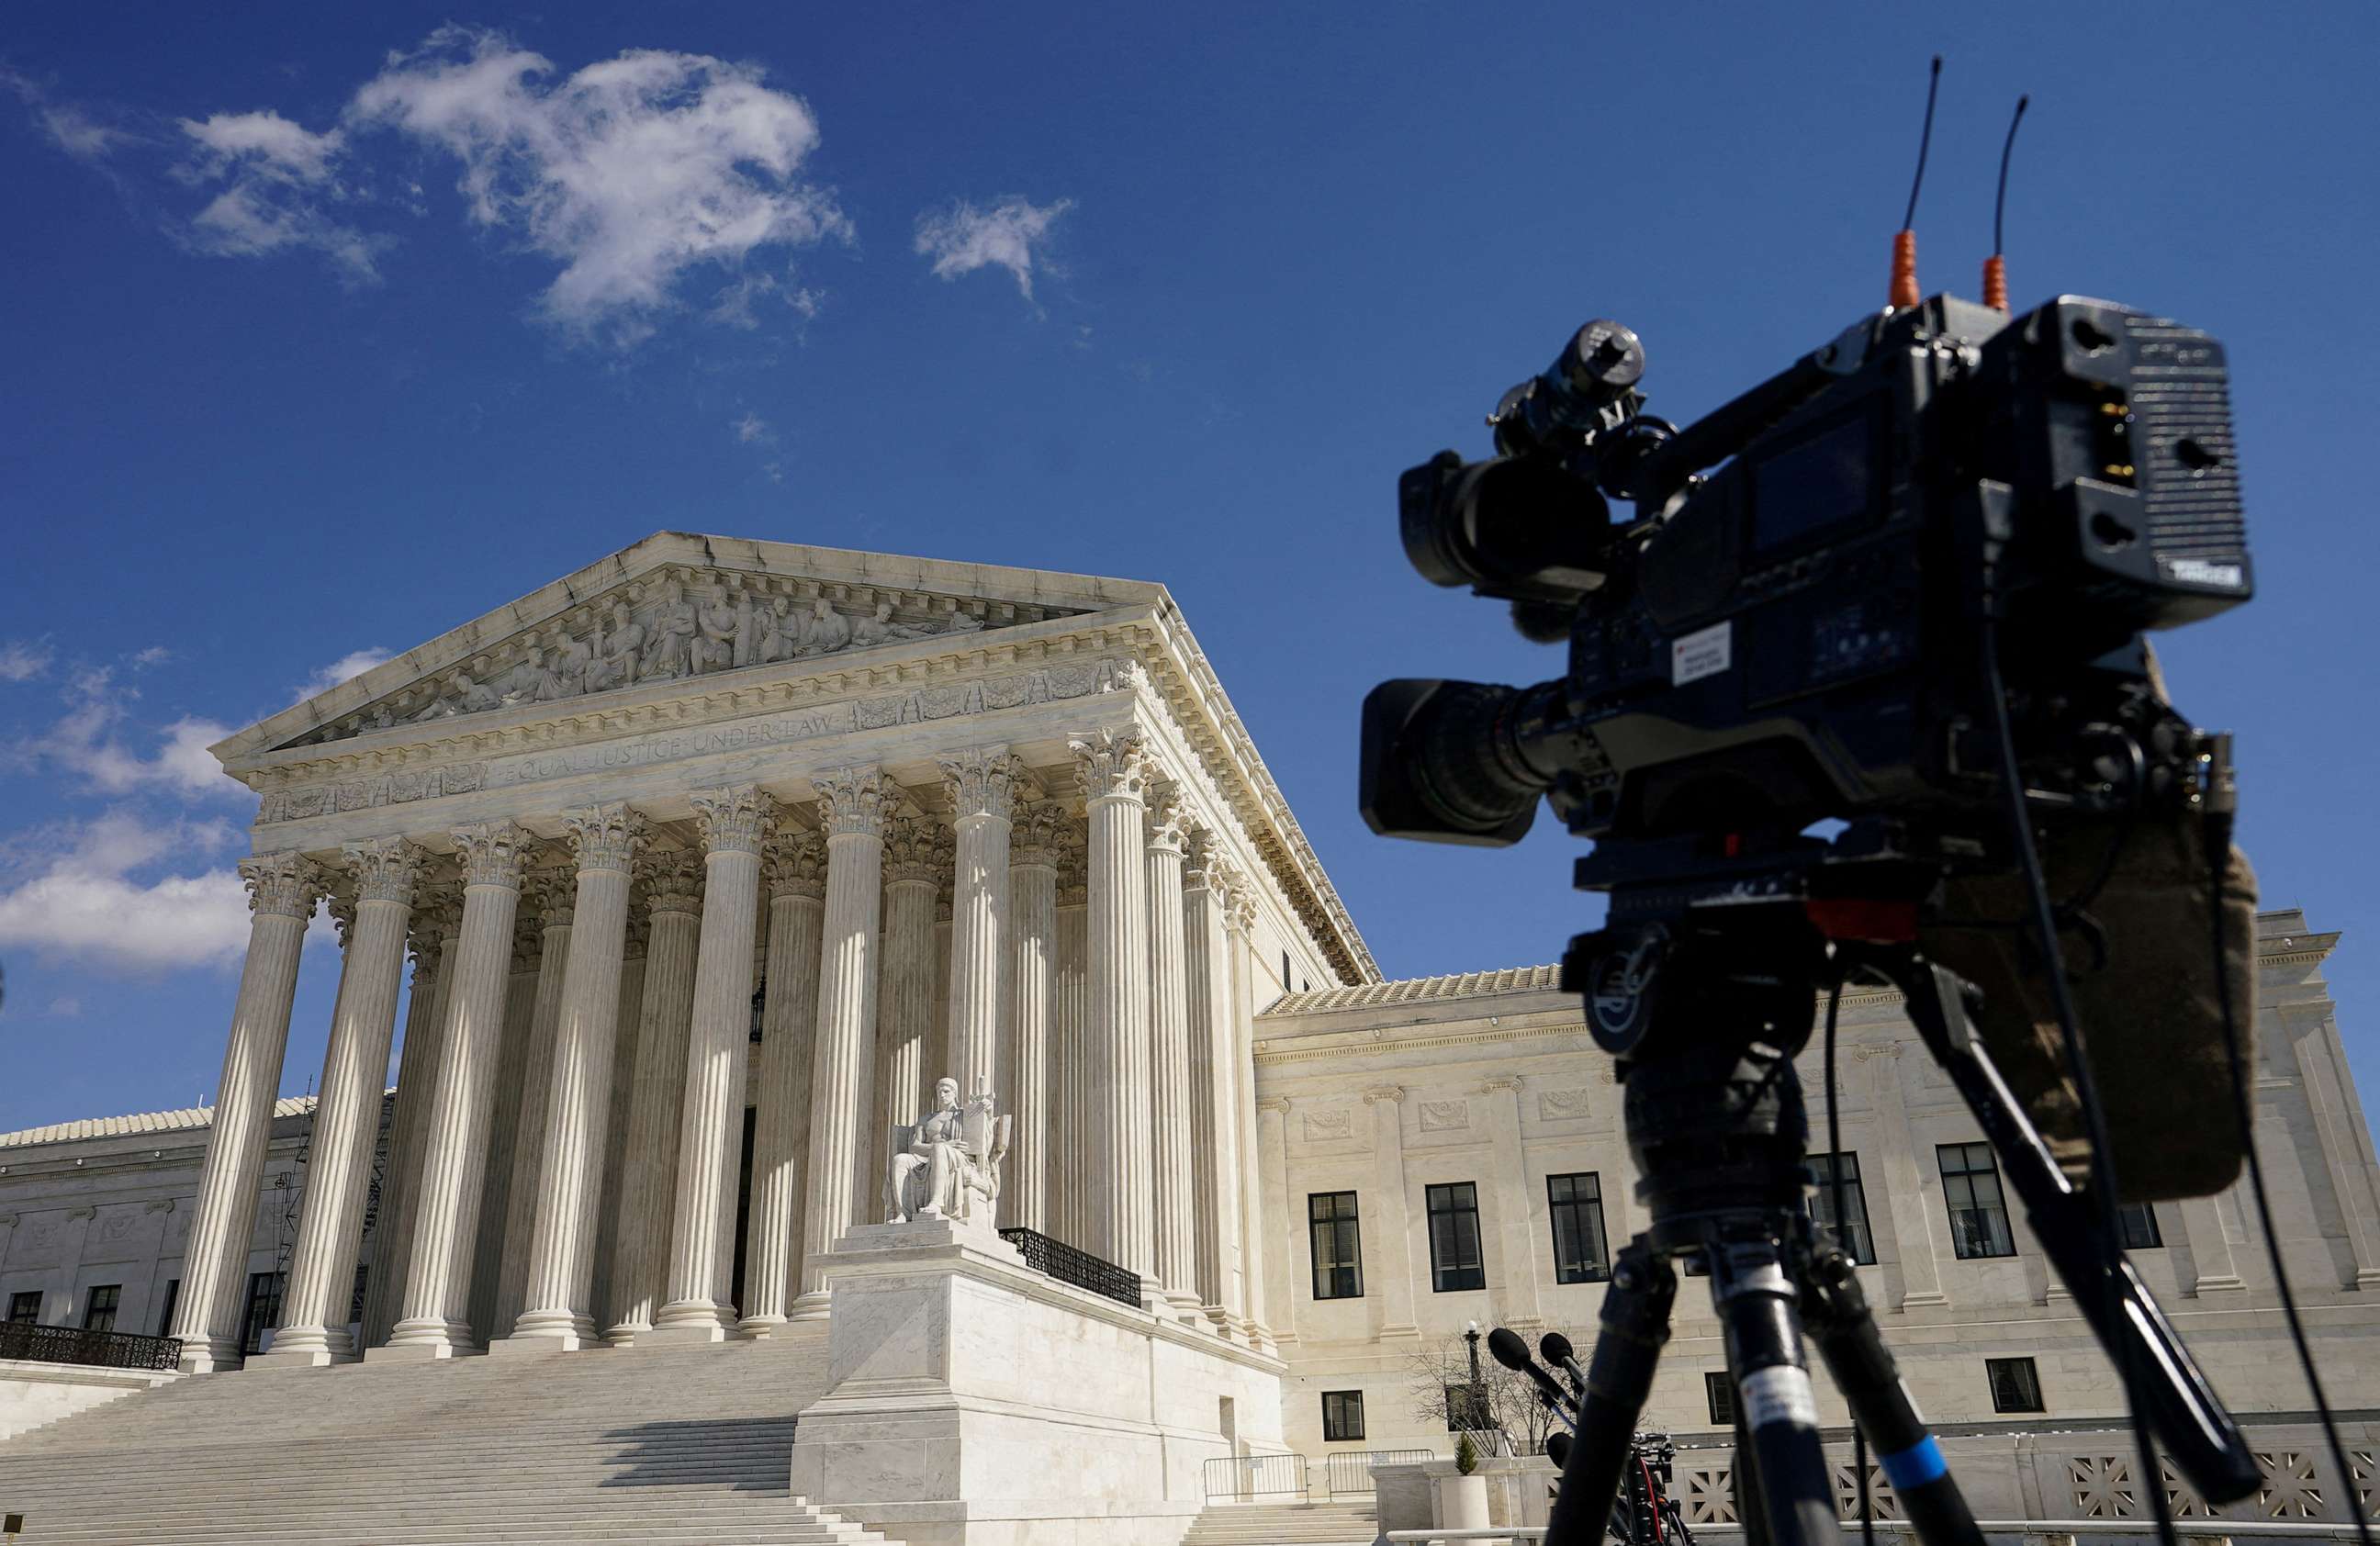 PHOTO: In this Feb. 21, 2023, file photo, a TV camera points to the U.S. Supreme Court in Washington, D.C.